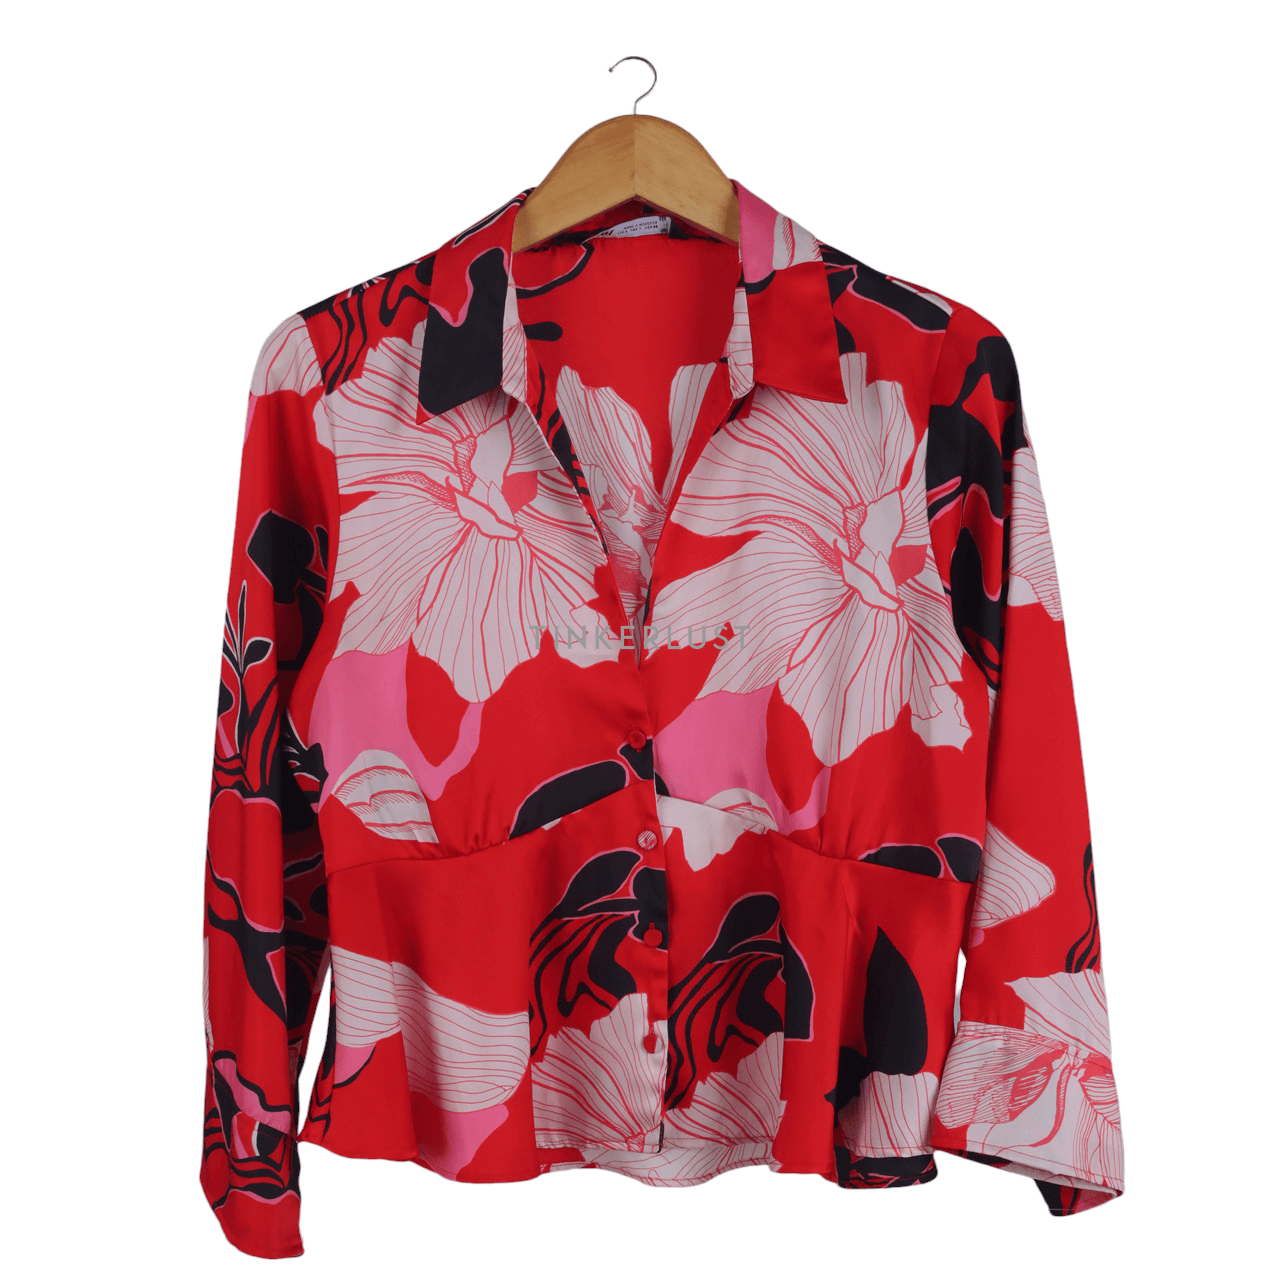 Zara Red Floral Blouse